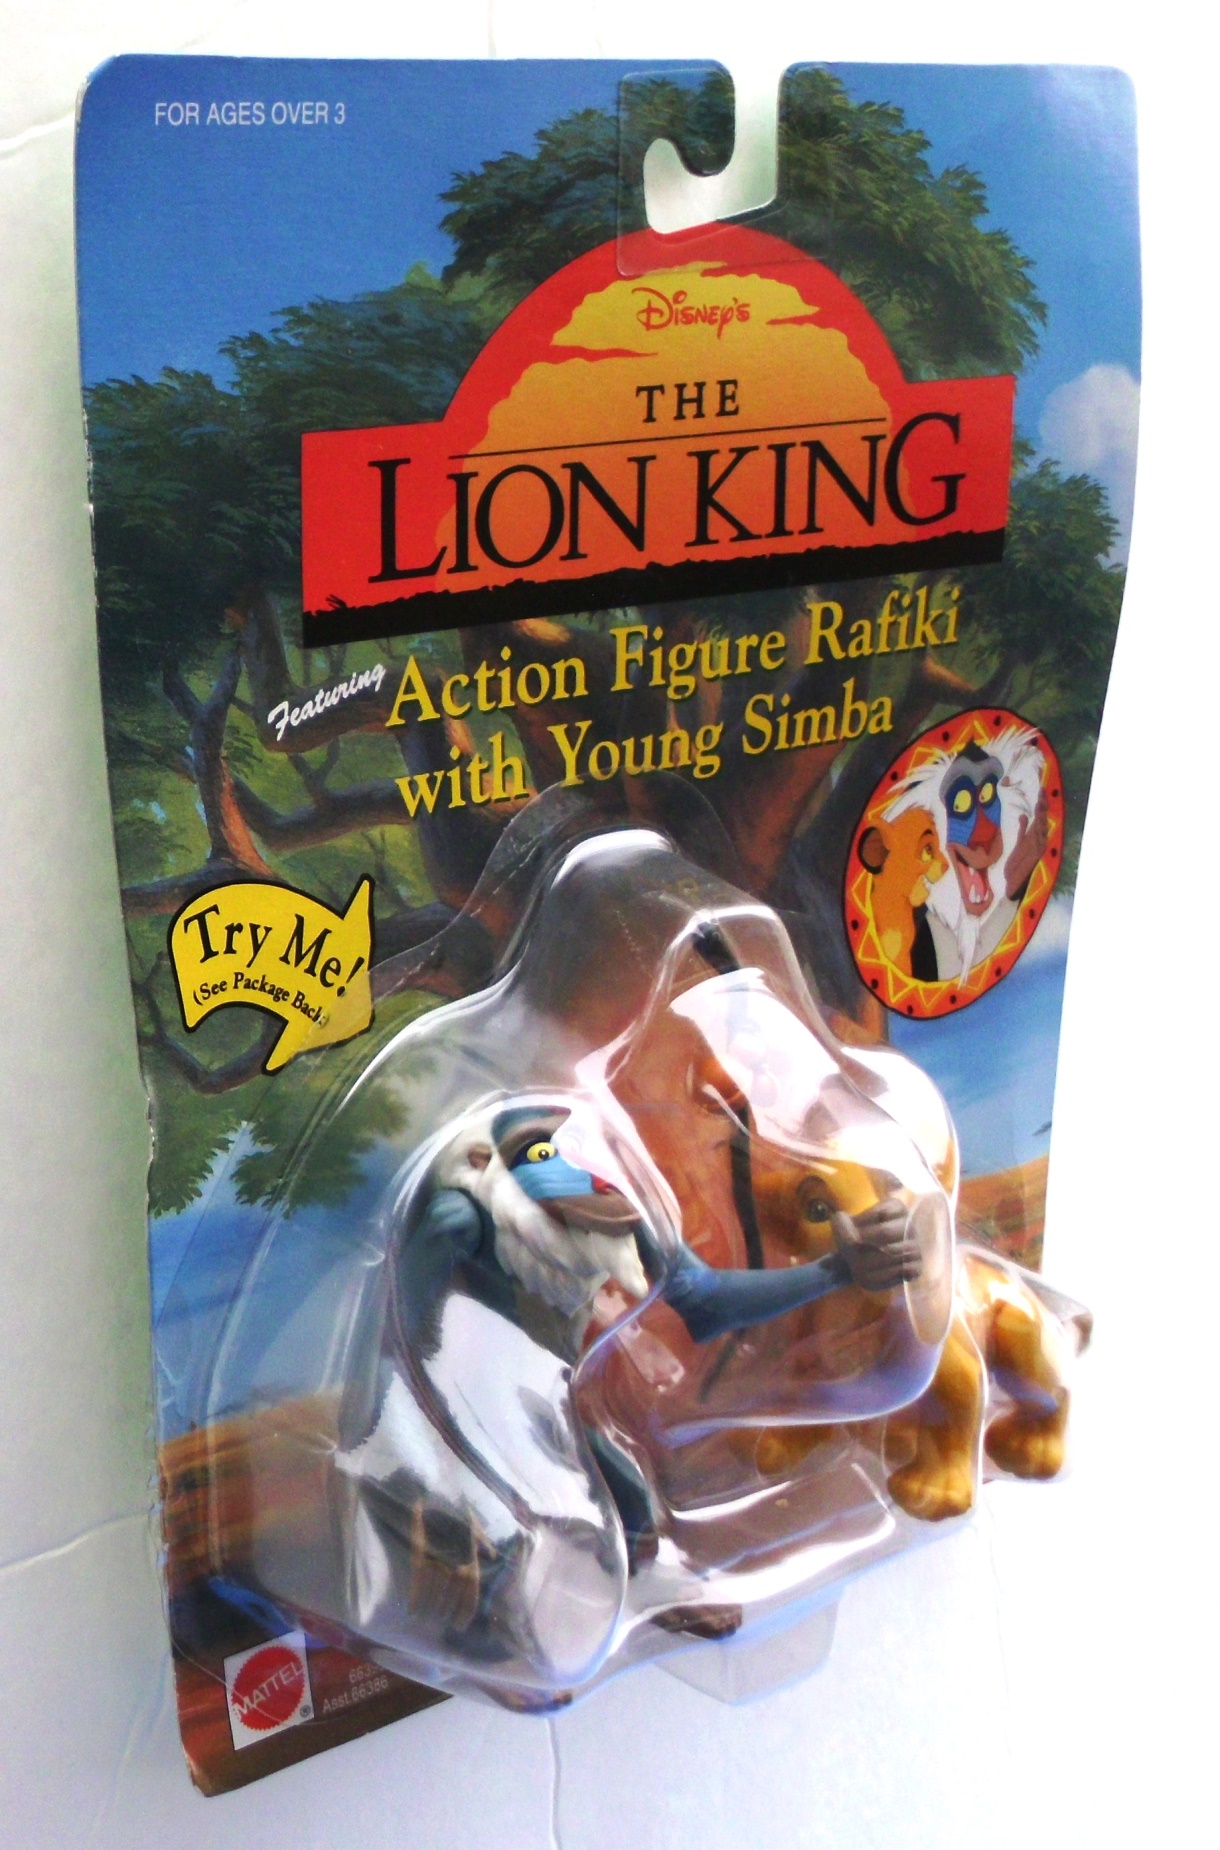 The Lion King 1994 (“Action Figure Rafiki with Young Simba”) “Disney's ...